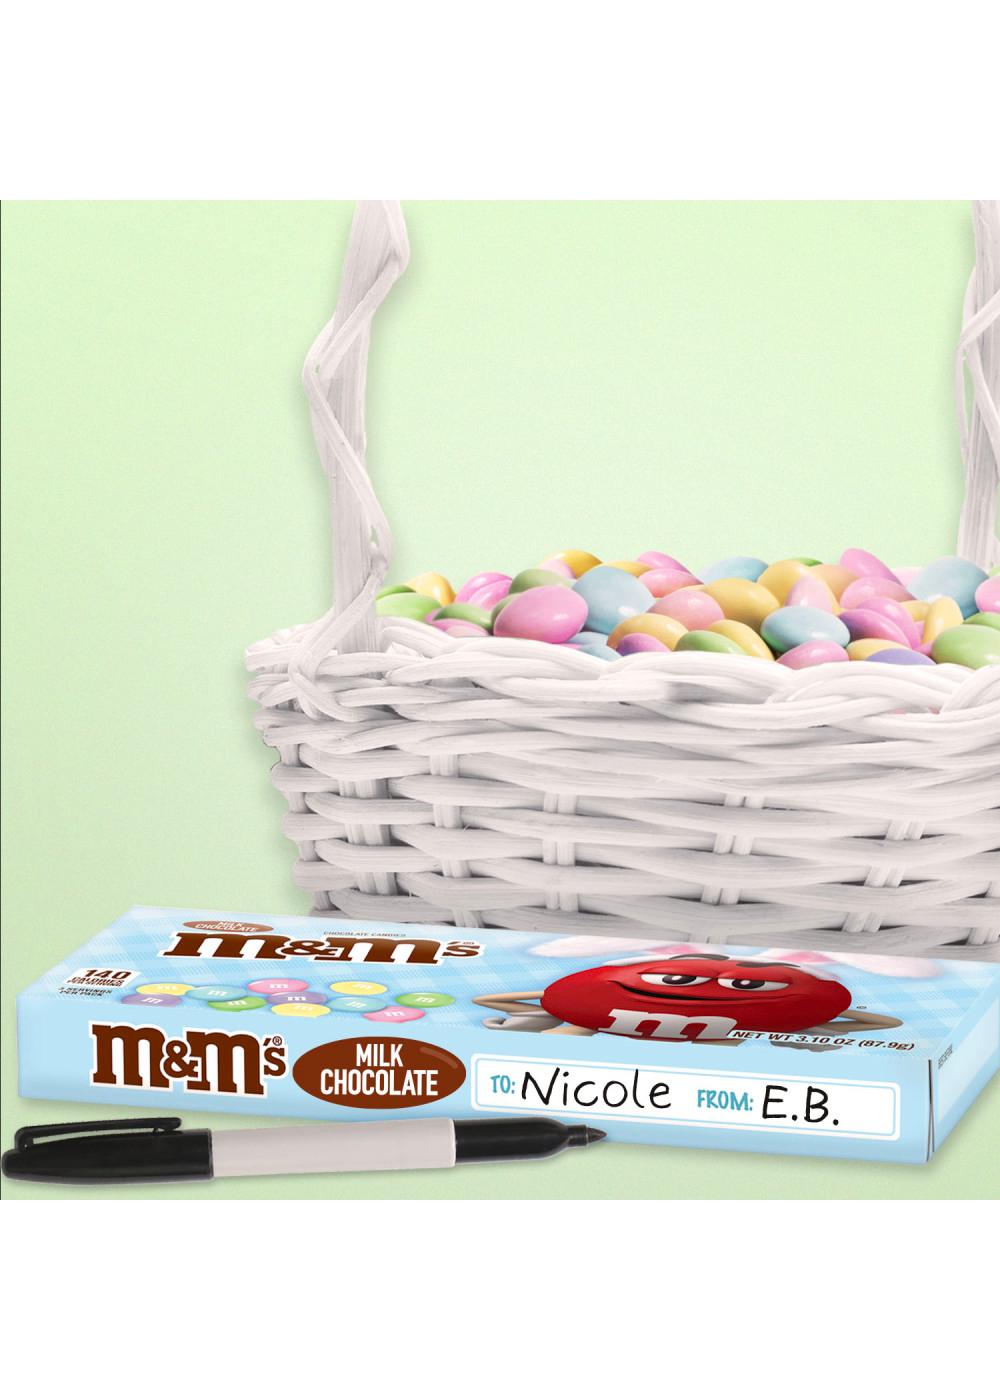 M&M'S Milk Chocolate Easter Candy Theater Box; image 7 of 7